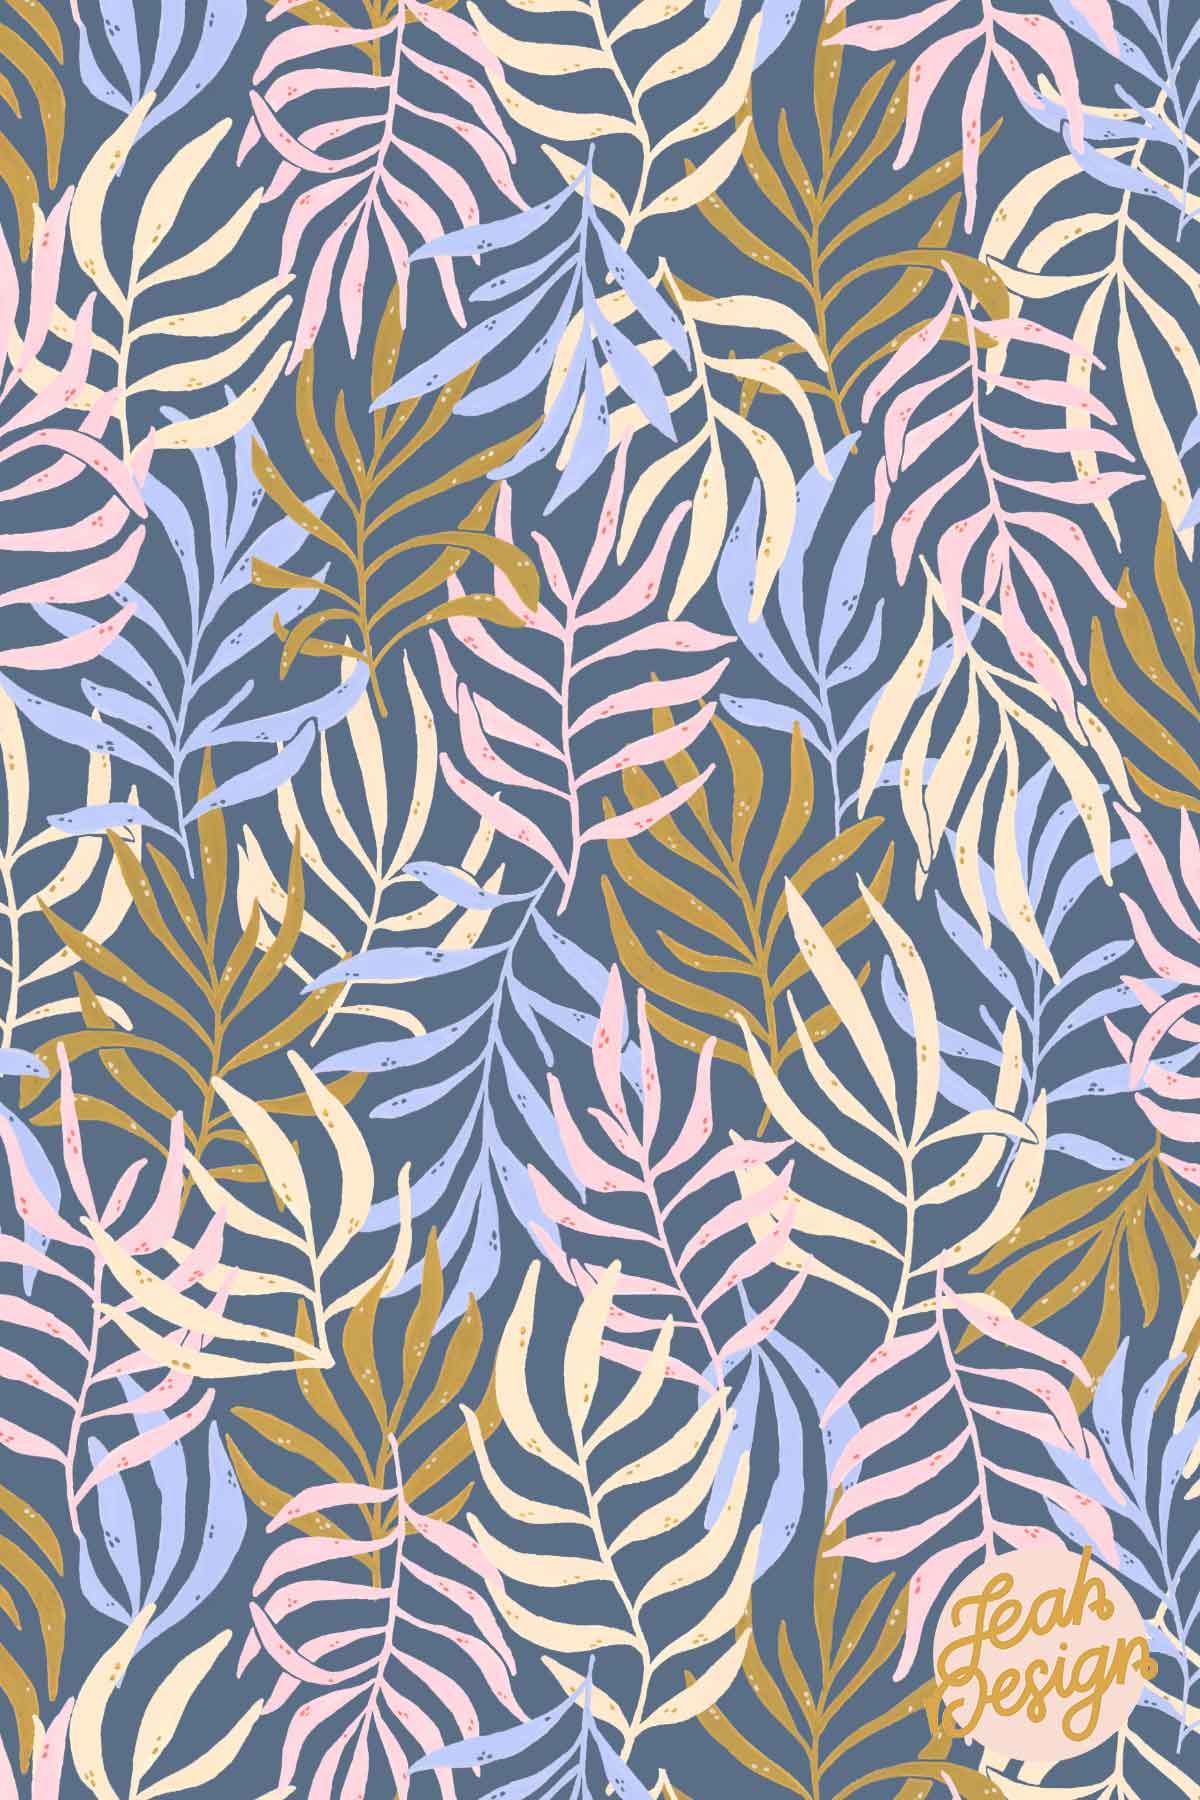 Repeat pattern of delicate gouache leaves in lavender blue, ochre, cream and pastel pink on a elemental blue background.